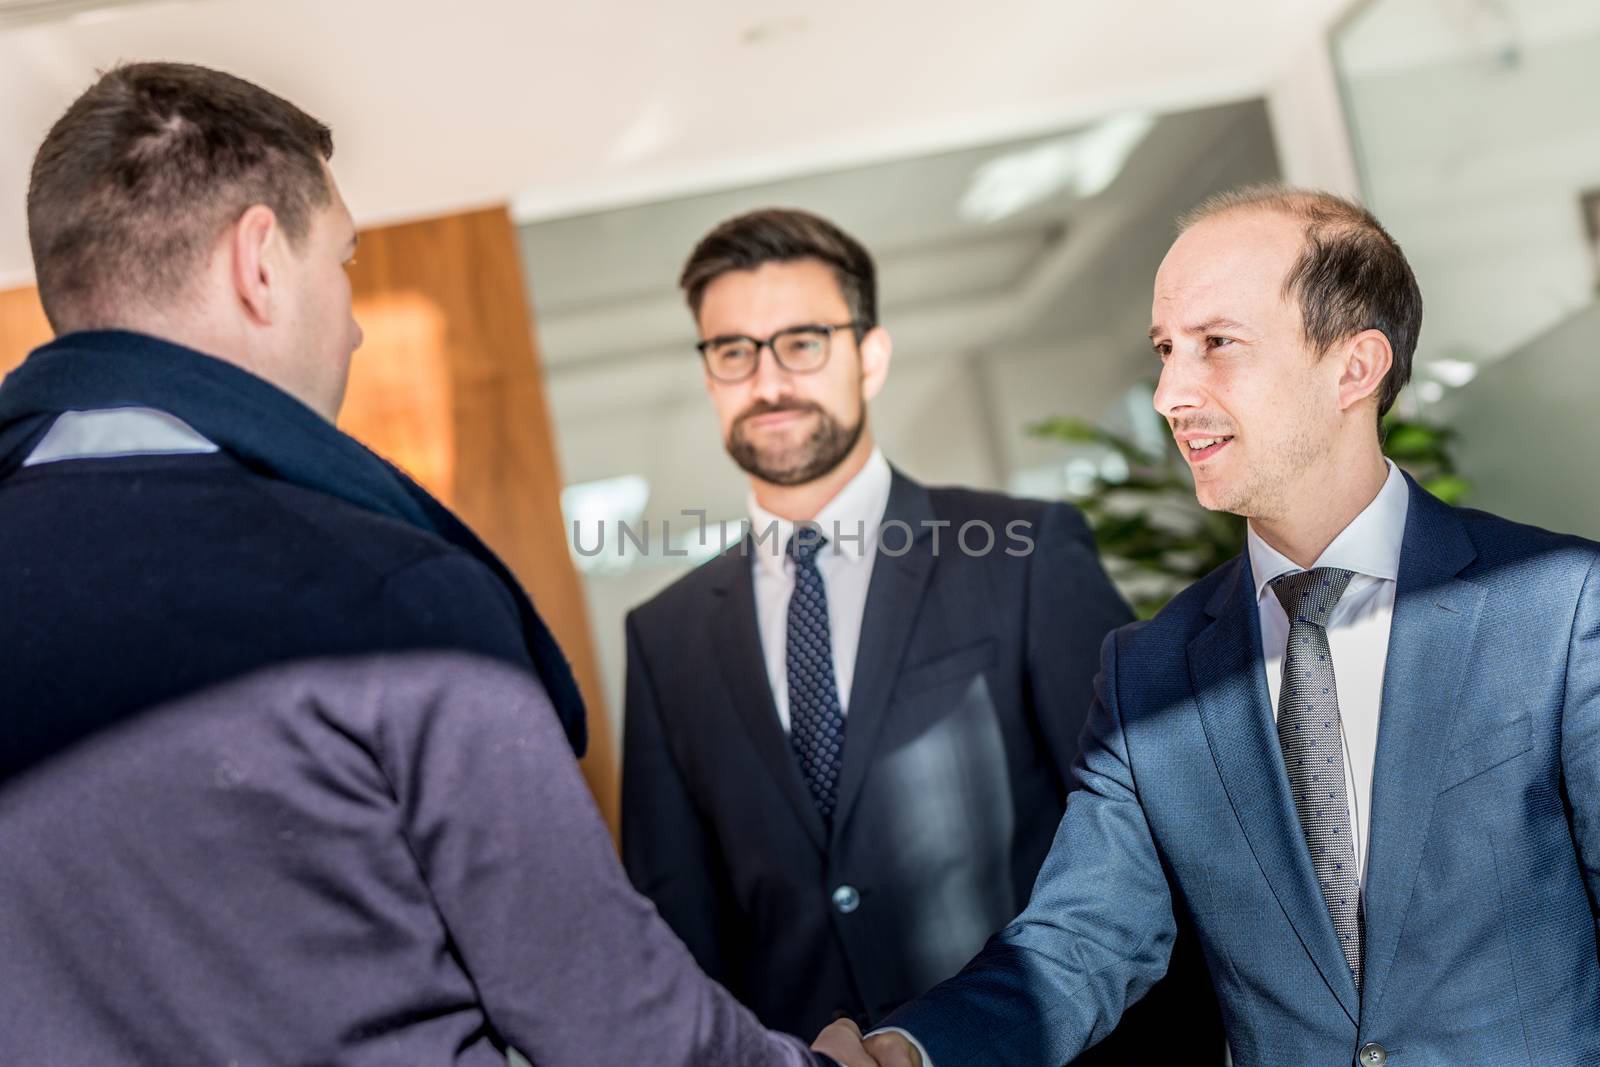 Group of confident business people greeting with a handshake at business meeting in modern office or closing the deal agreement by shaking hands. by kasto